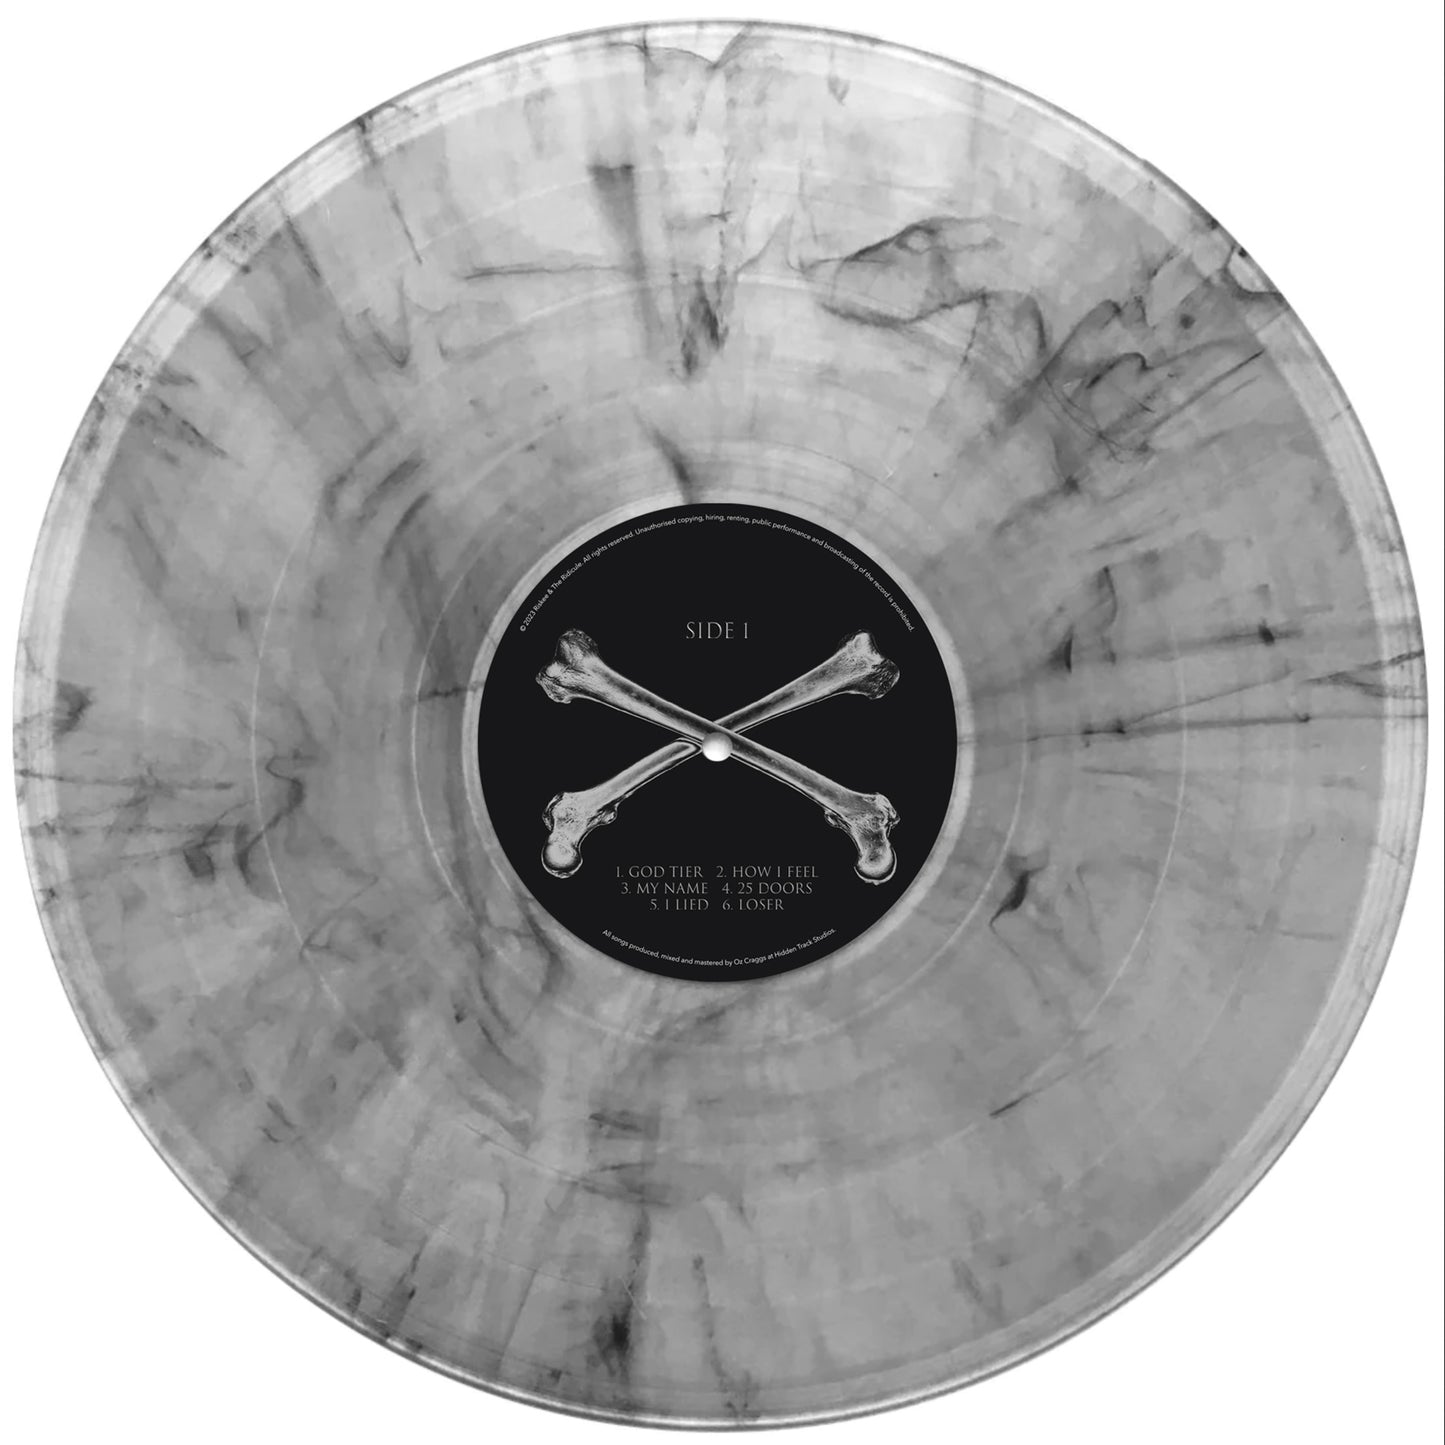 Riskee & The Ridicule - Platinum Statue NEW ALBUM! - Grey and Clear Marbled Vinyl